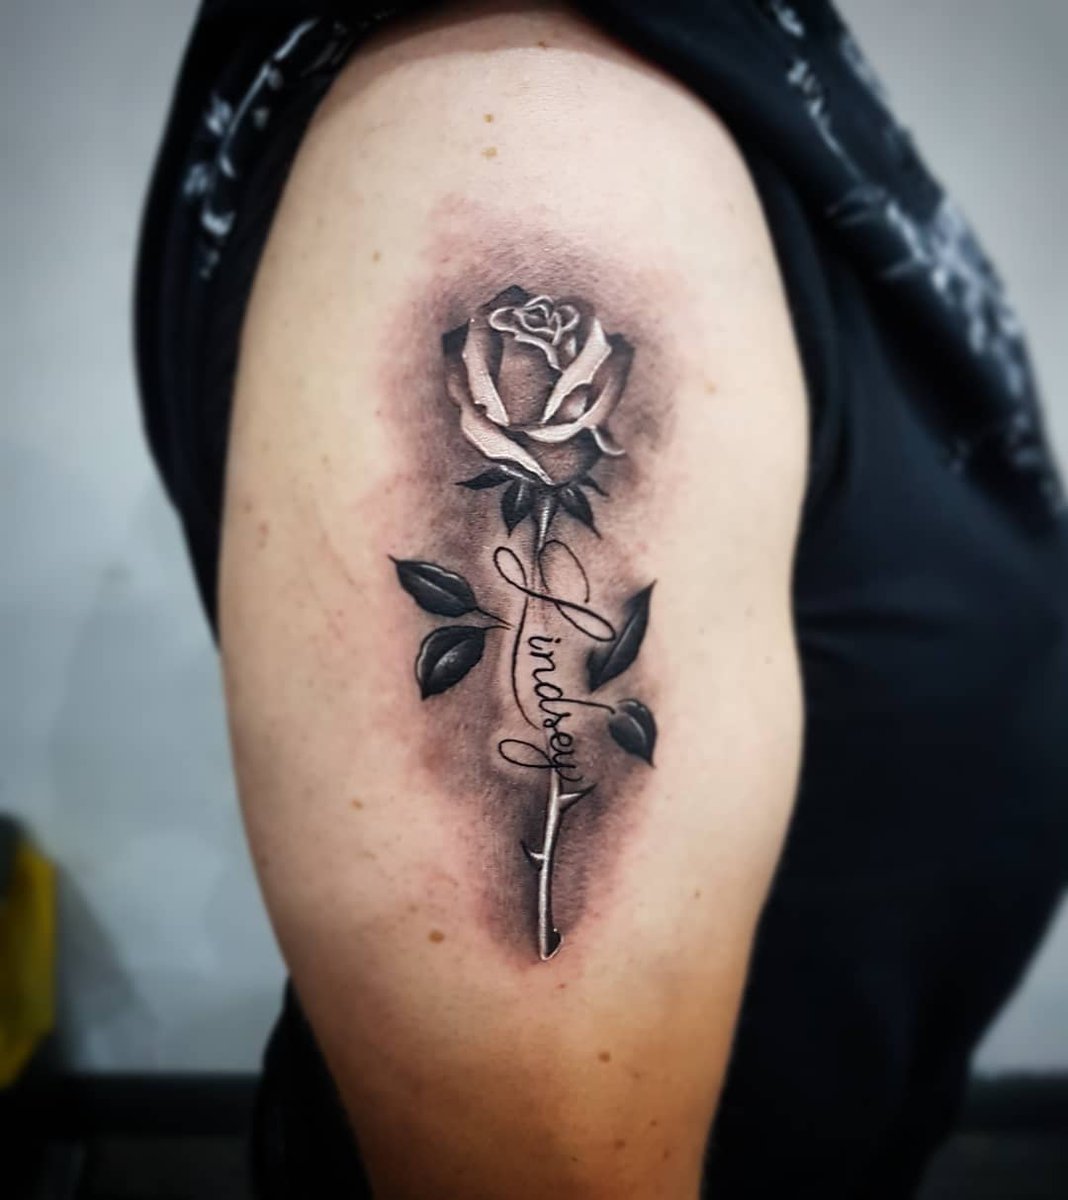 Looking for a tribute tattoo?
Nel's recent piece is a great tribute to the clients wife.  

Looking for a booking contact vidalocatattoobolton@gmail.com
.
#wifetattoo #tributetattoo #tattoo #vidalocatattoo